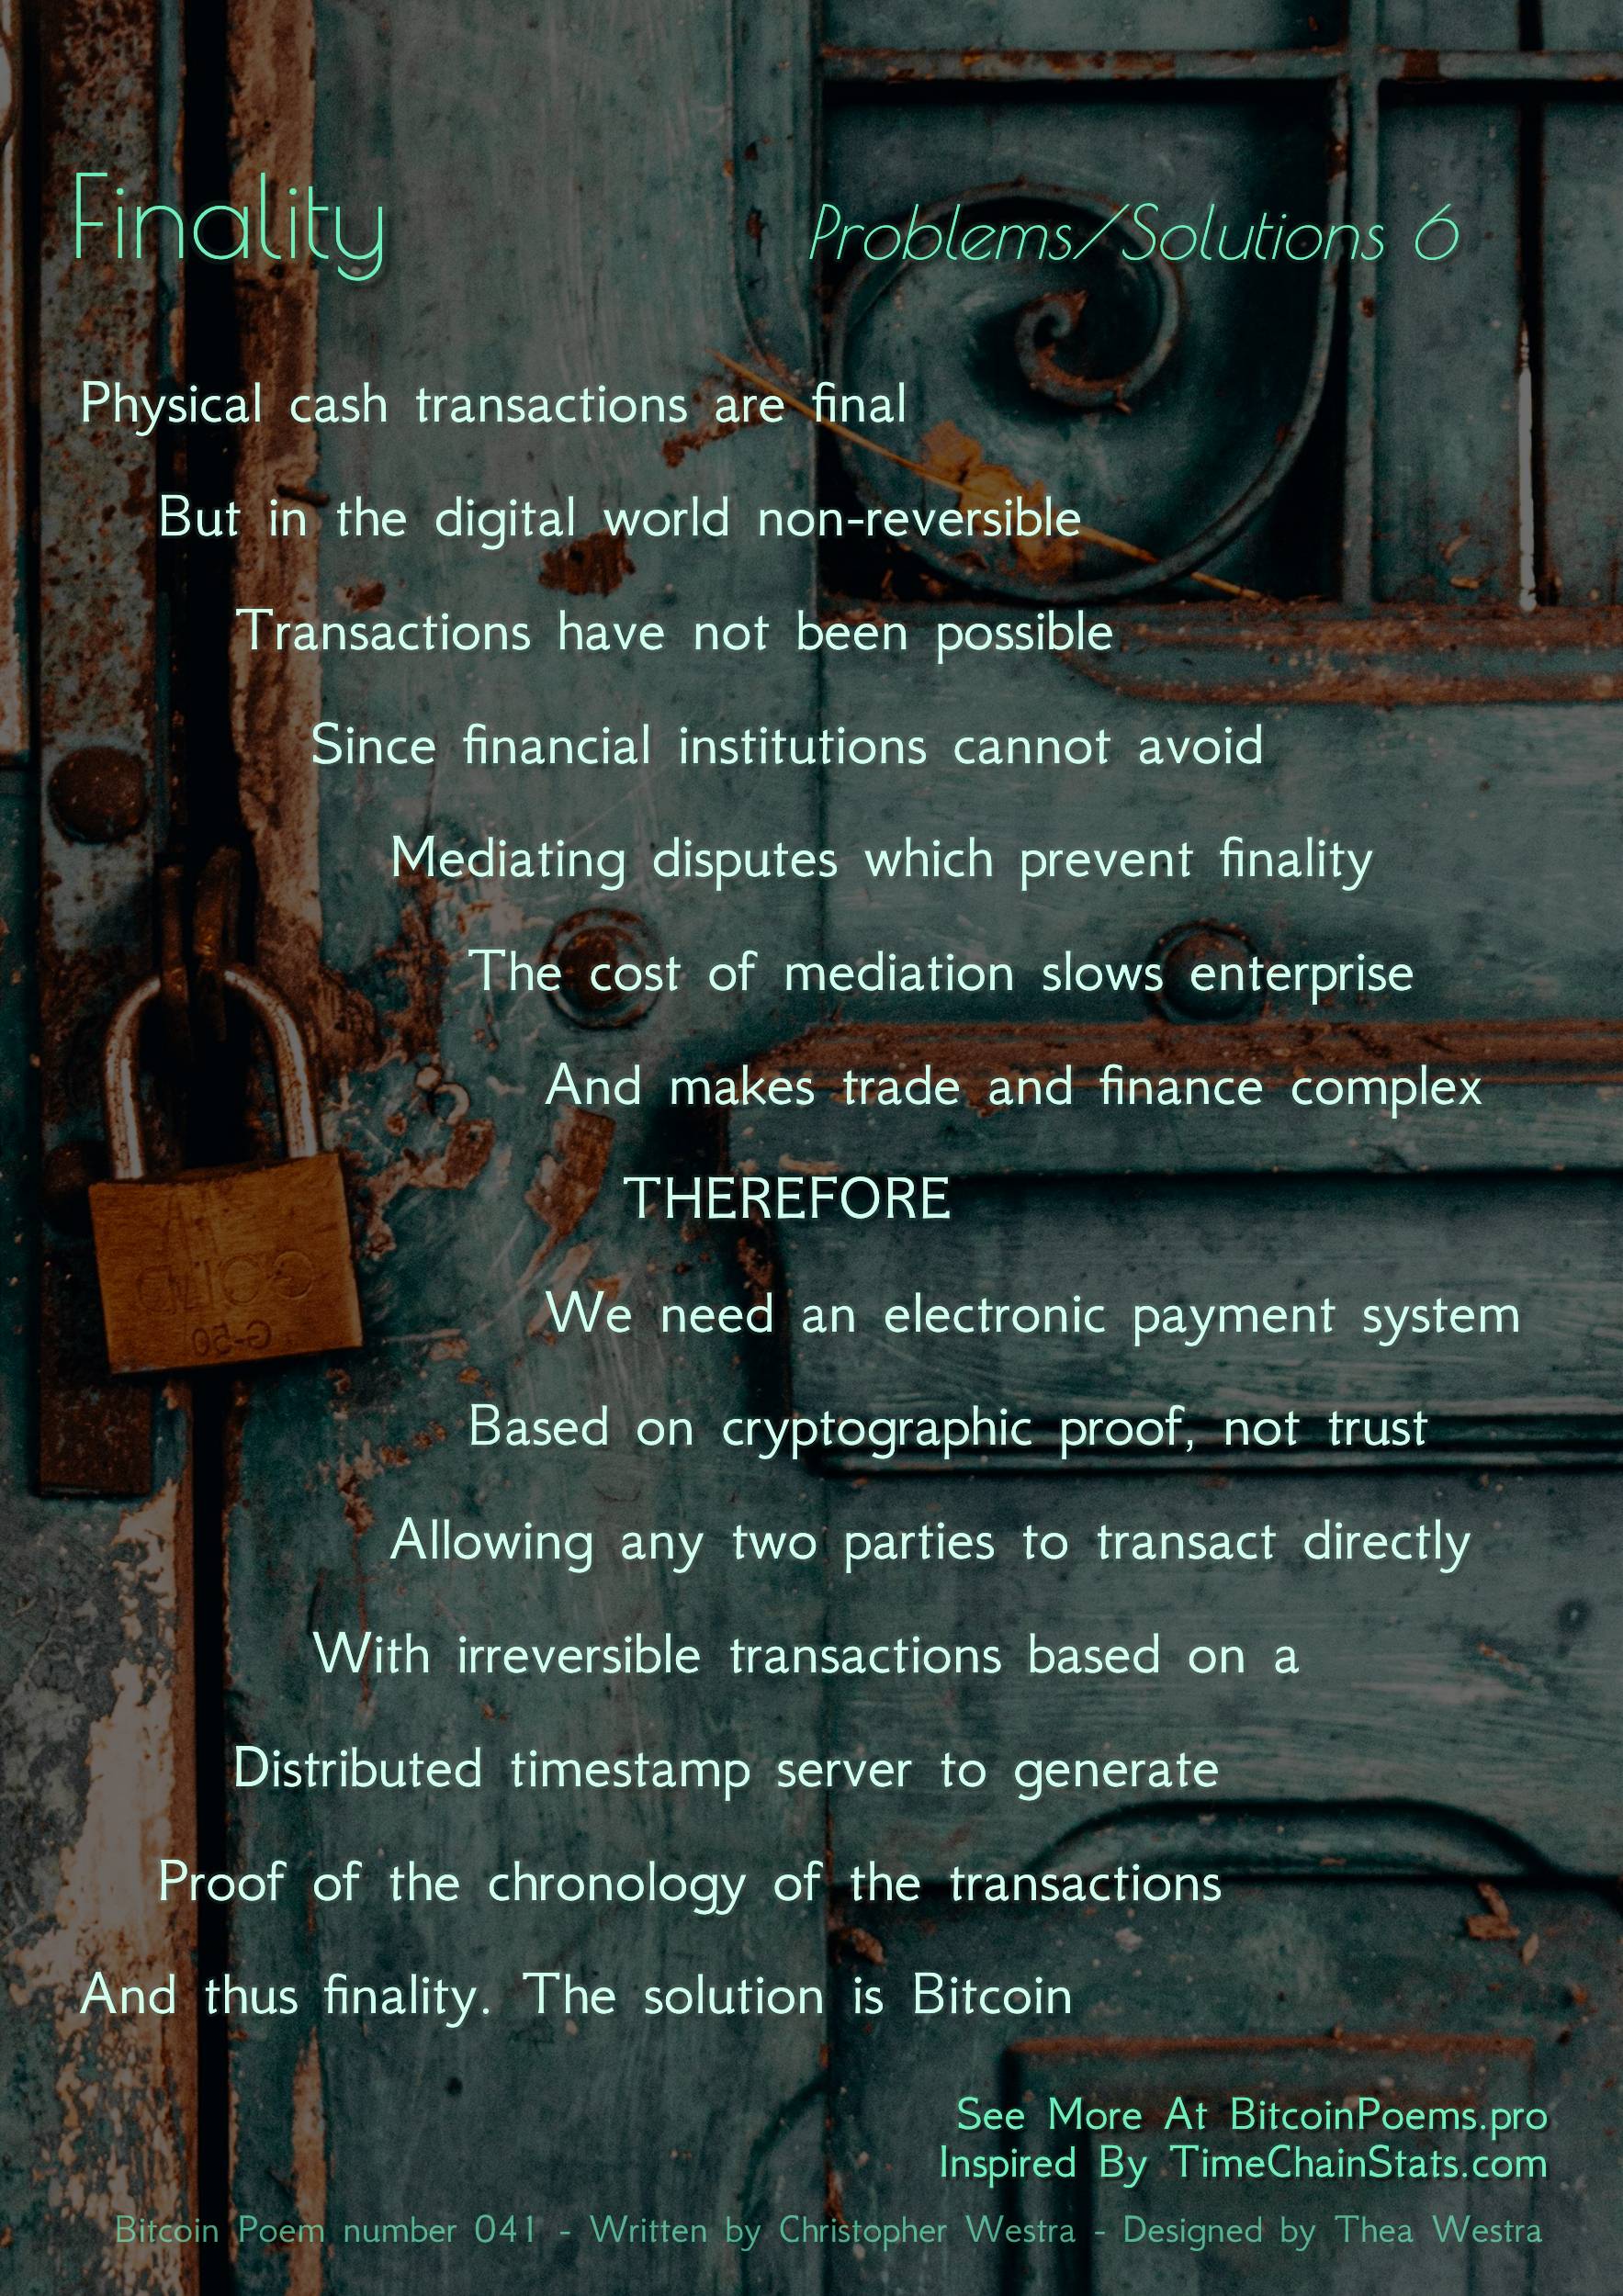 Finality - Bitcoin Poem 041 by Christopher Westra